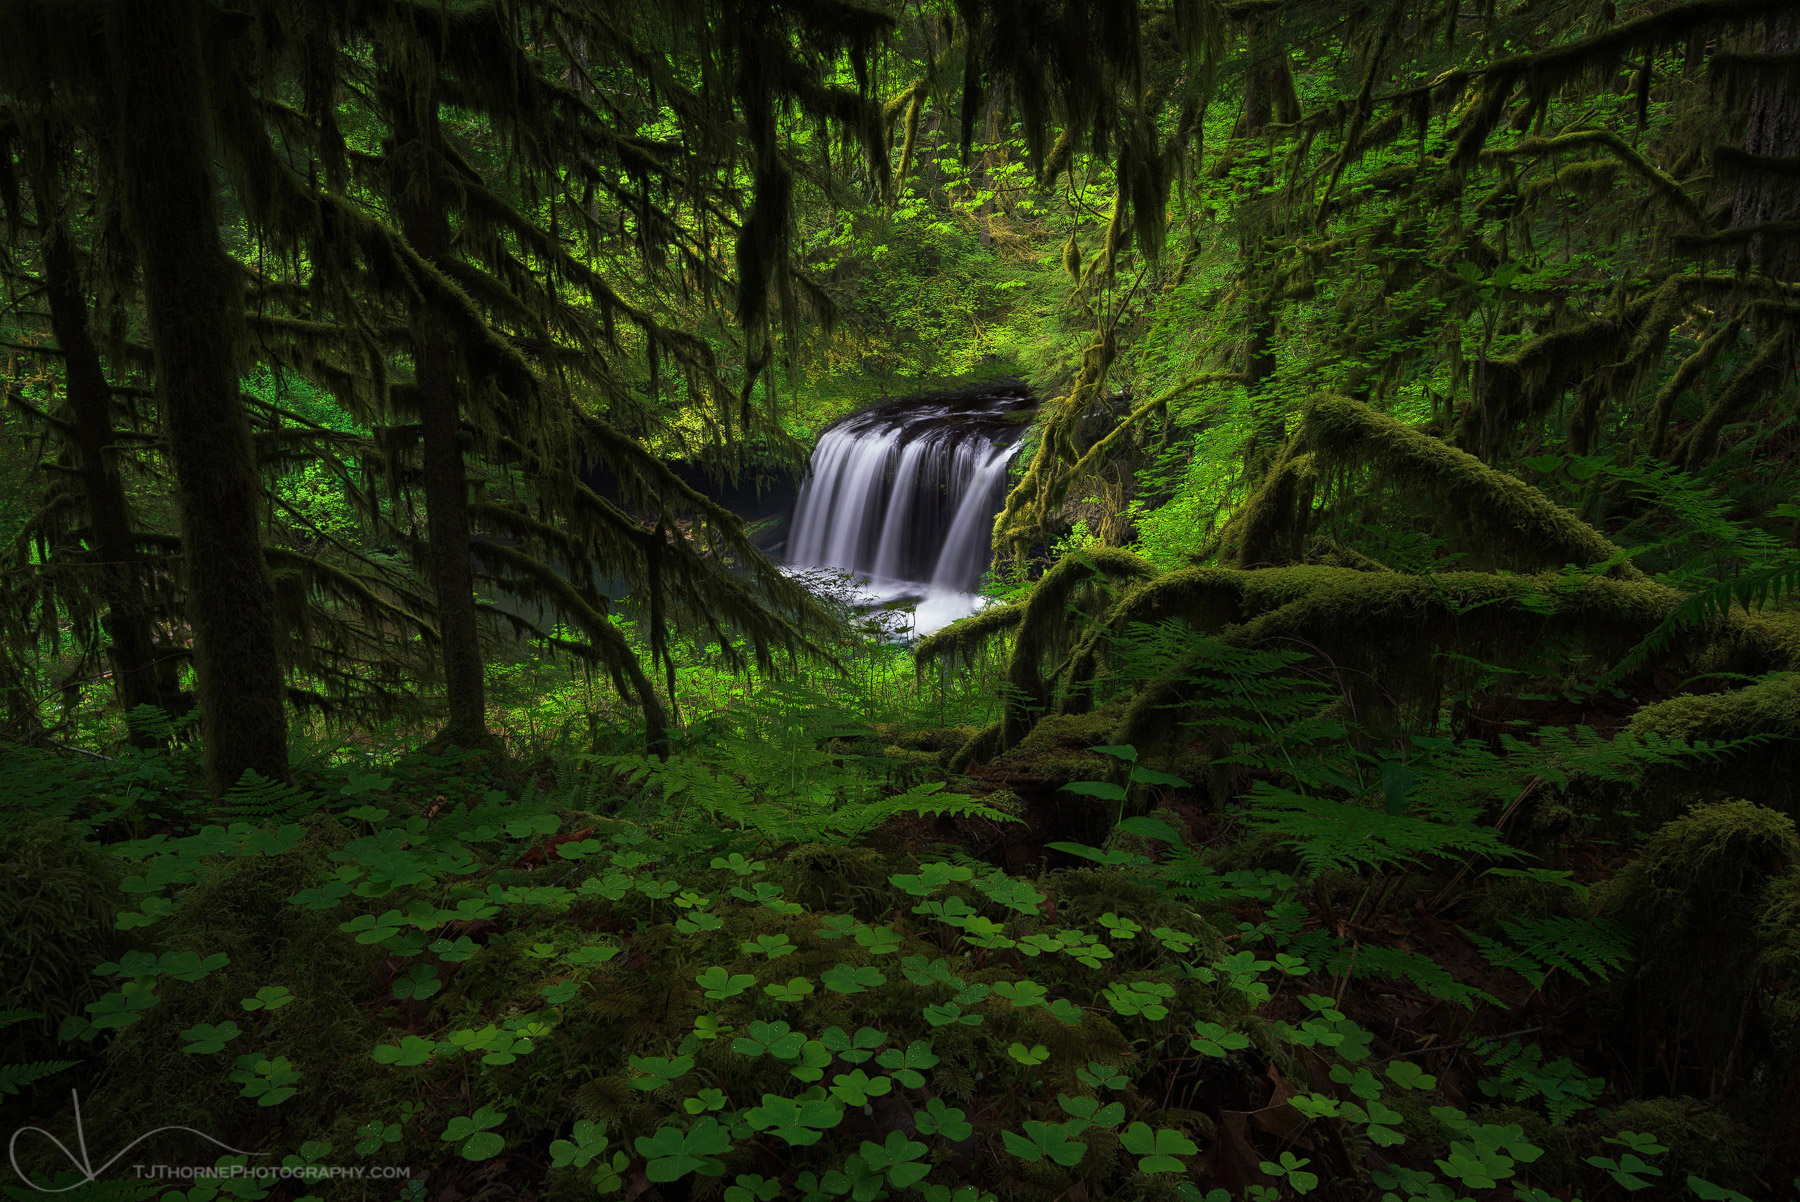 Upper Butte Creek Falls as seen through a window of mossy forest, spring clover, and ferns. On September 24, 2015 I celebrated...